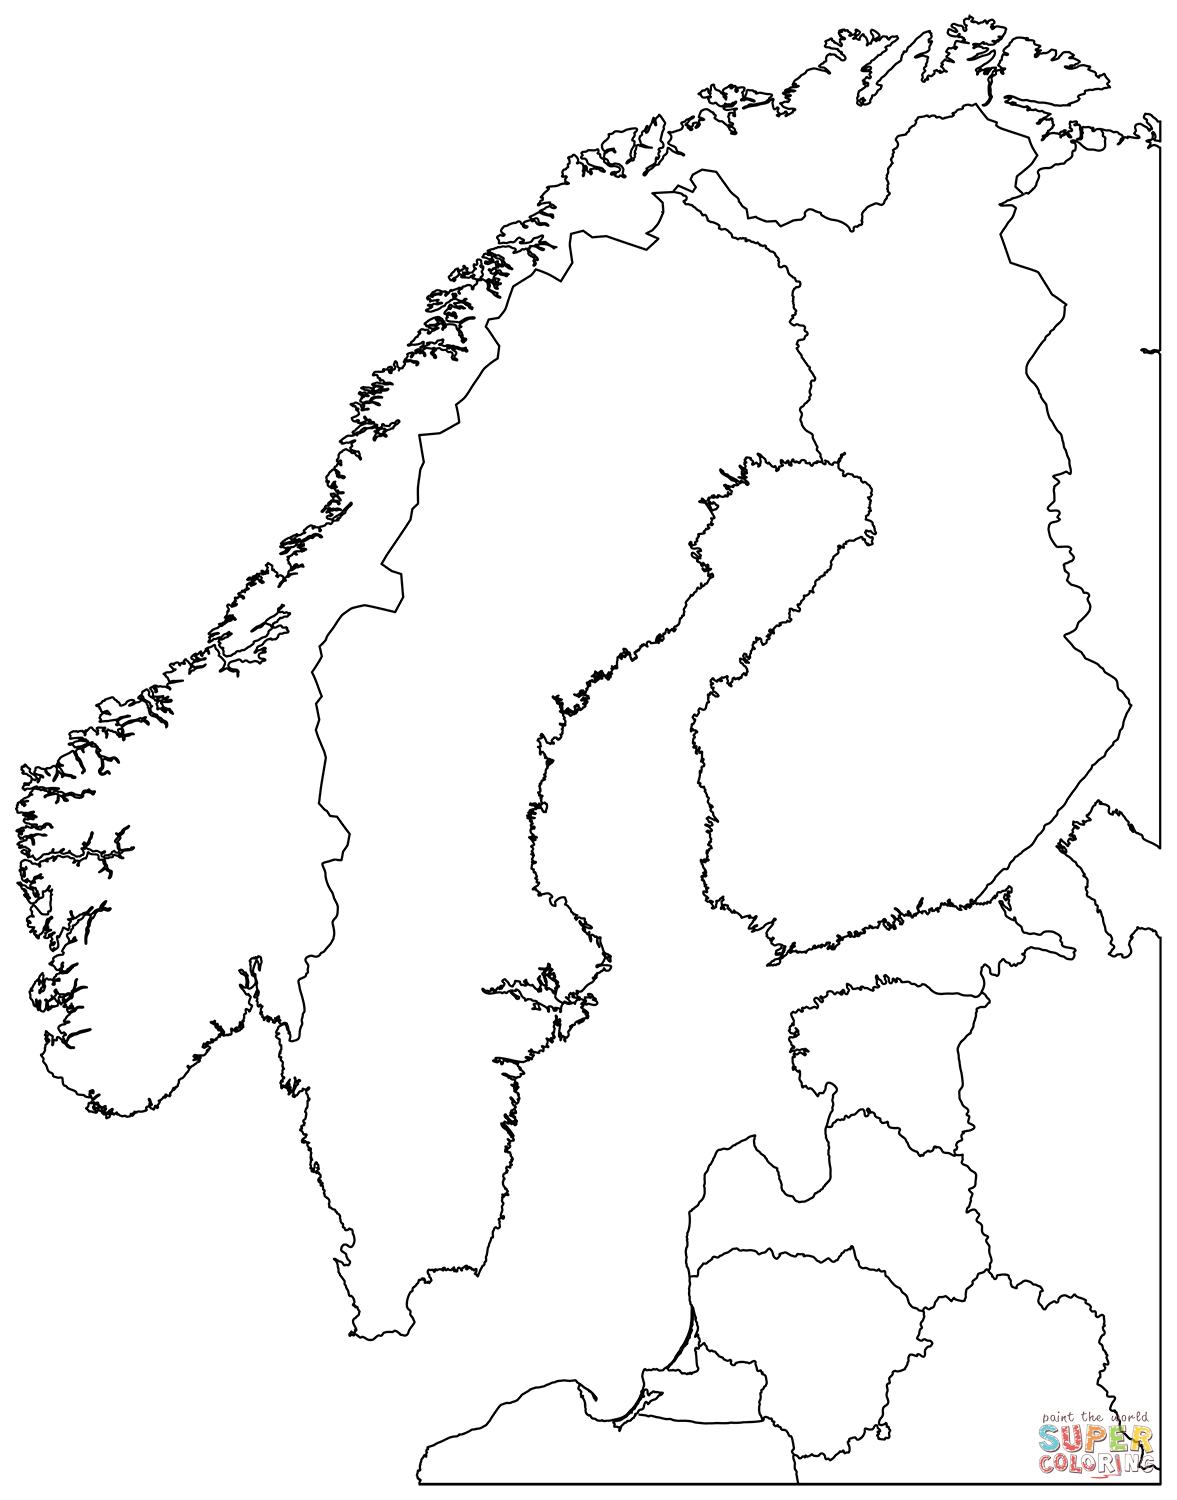 Outline map of scandinavia with countries coloring page free printable coloring pages